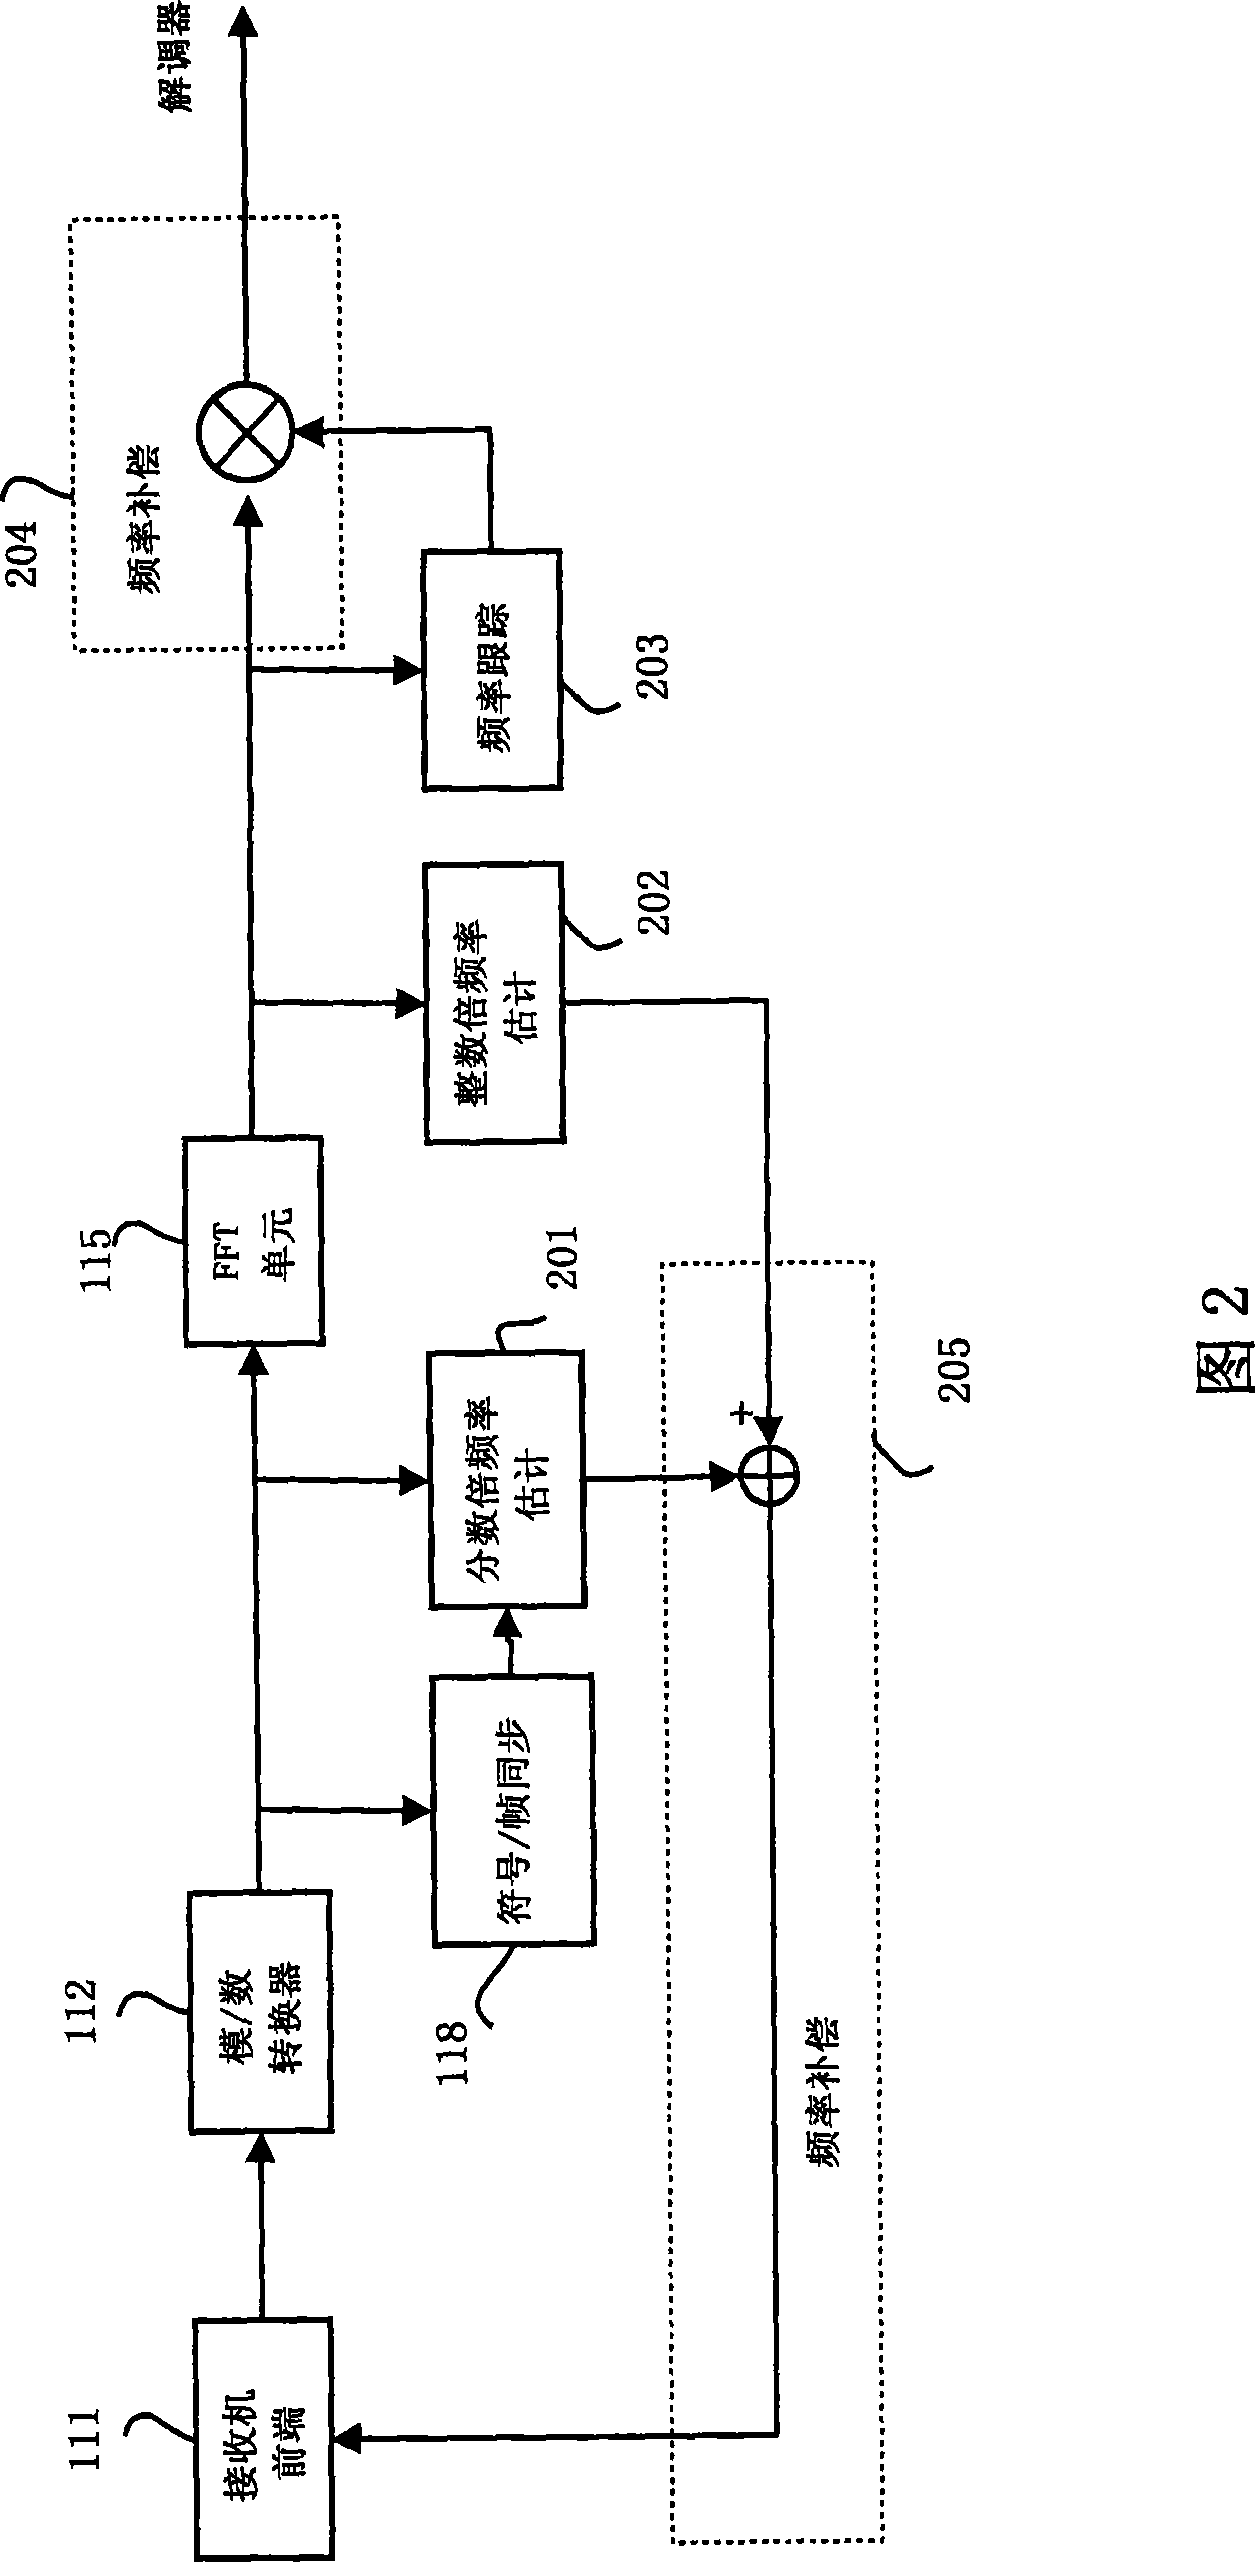 Method and apparatus for synchronization of orthogonal frequency division multiplexing system frequency